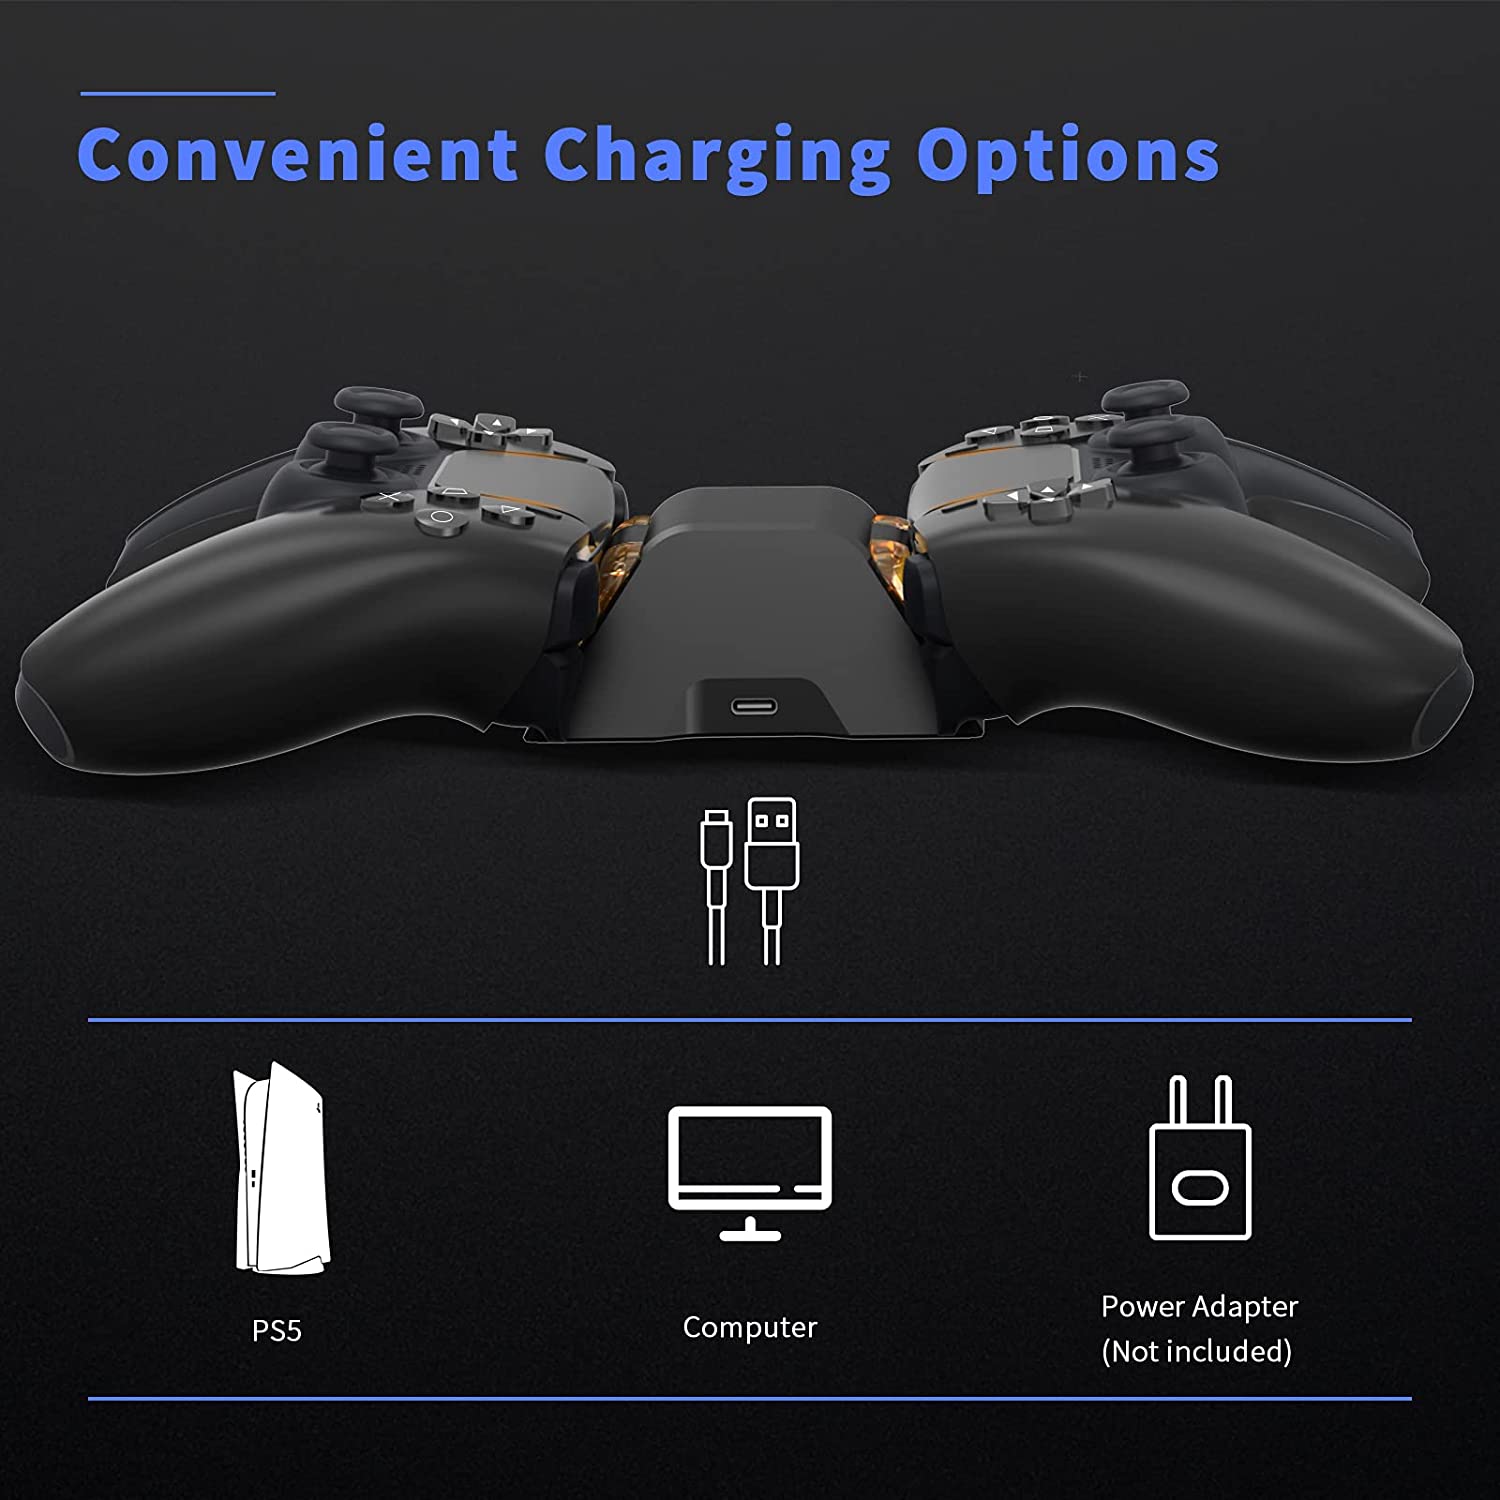 Multiple charging options can be connected to PS5 console/computer/power adapter (not included).